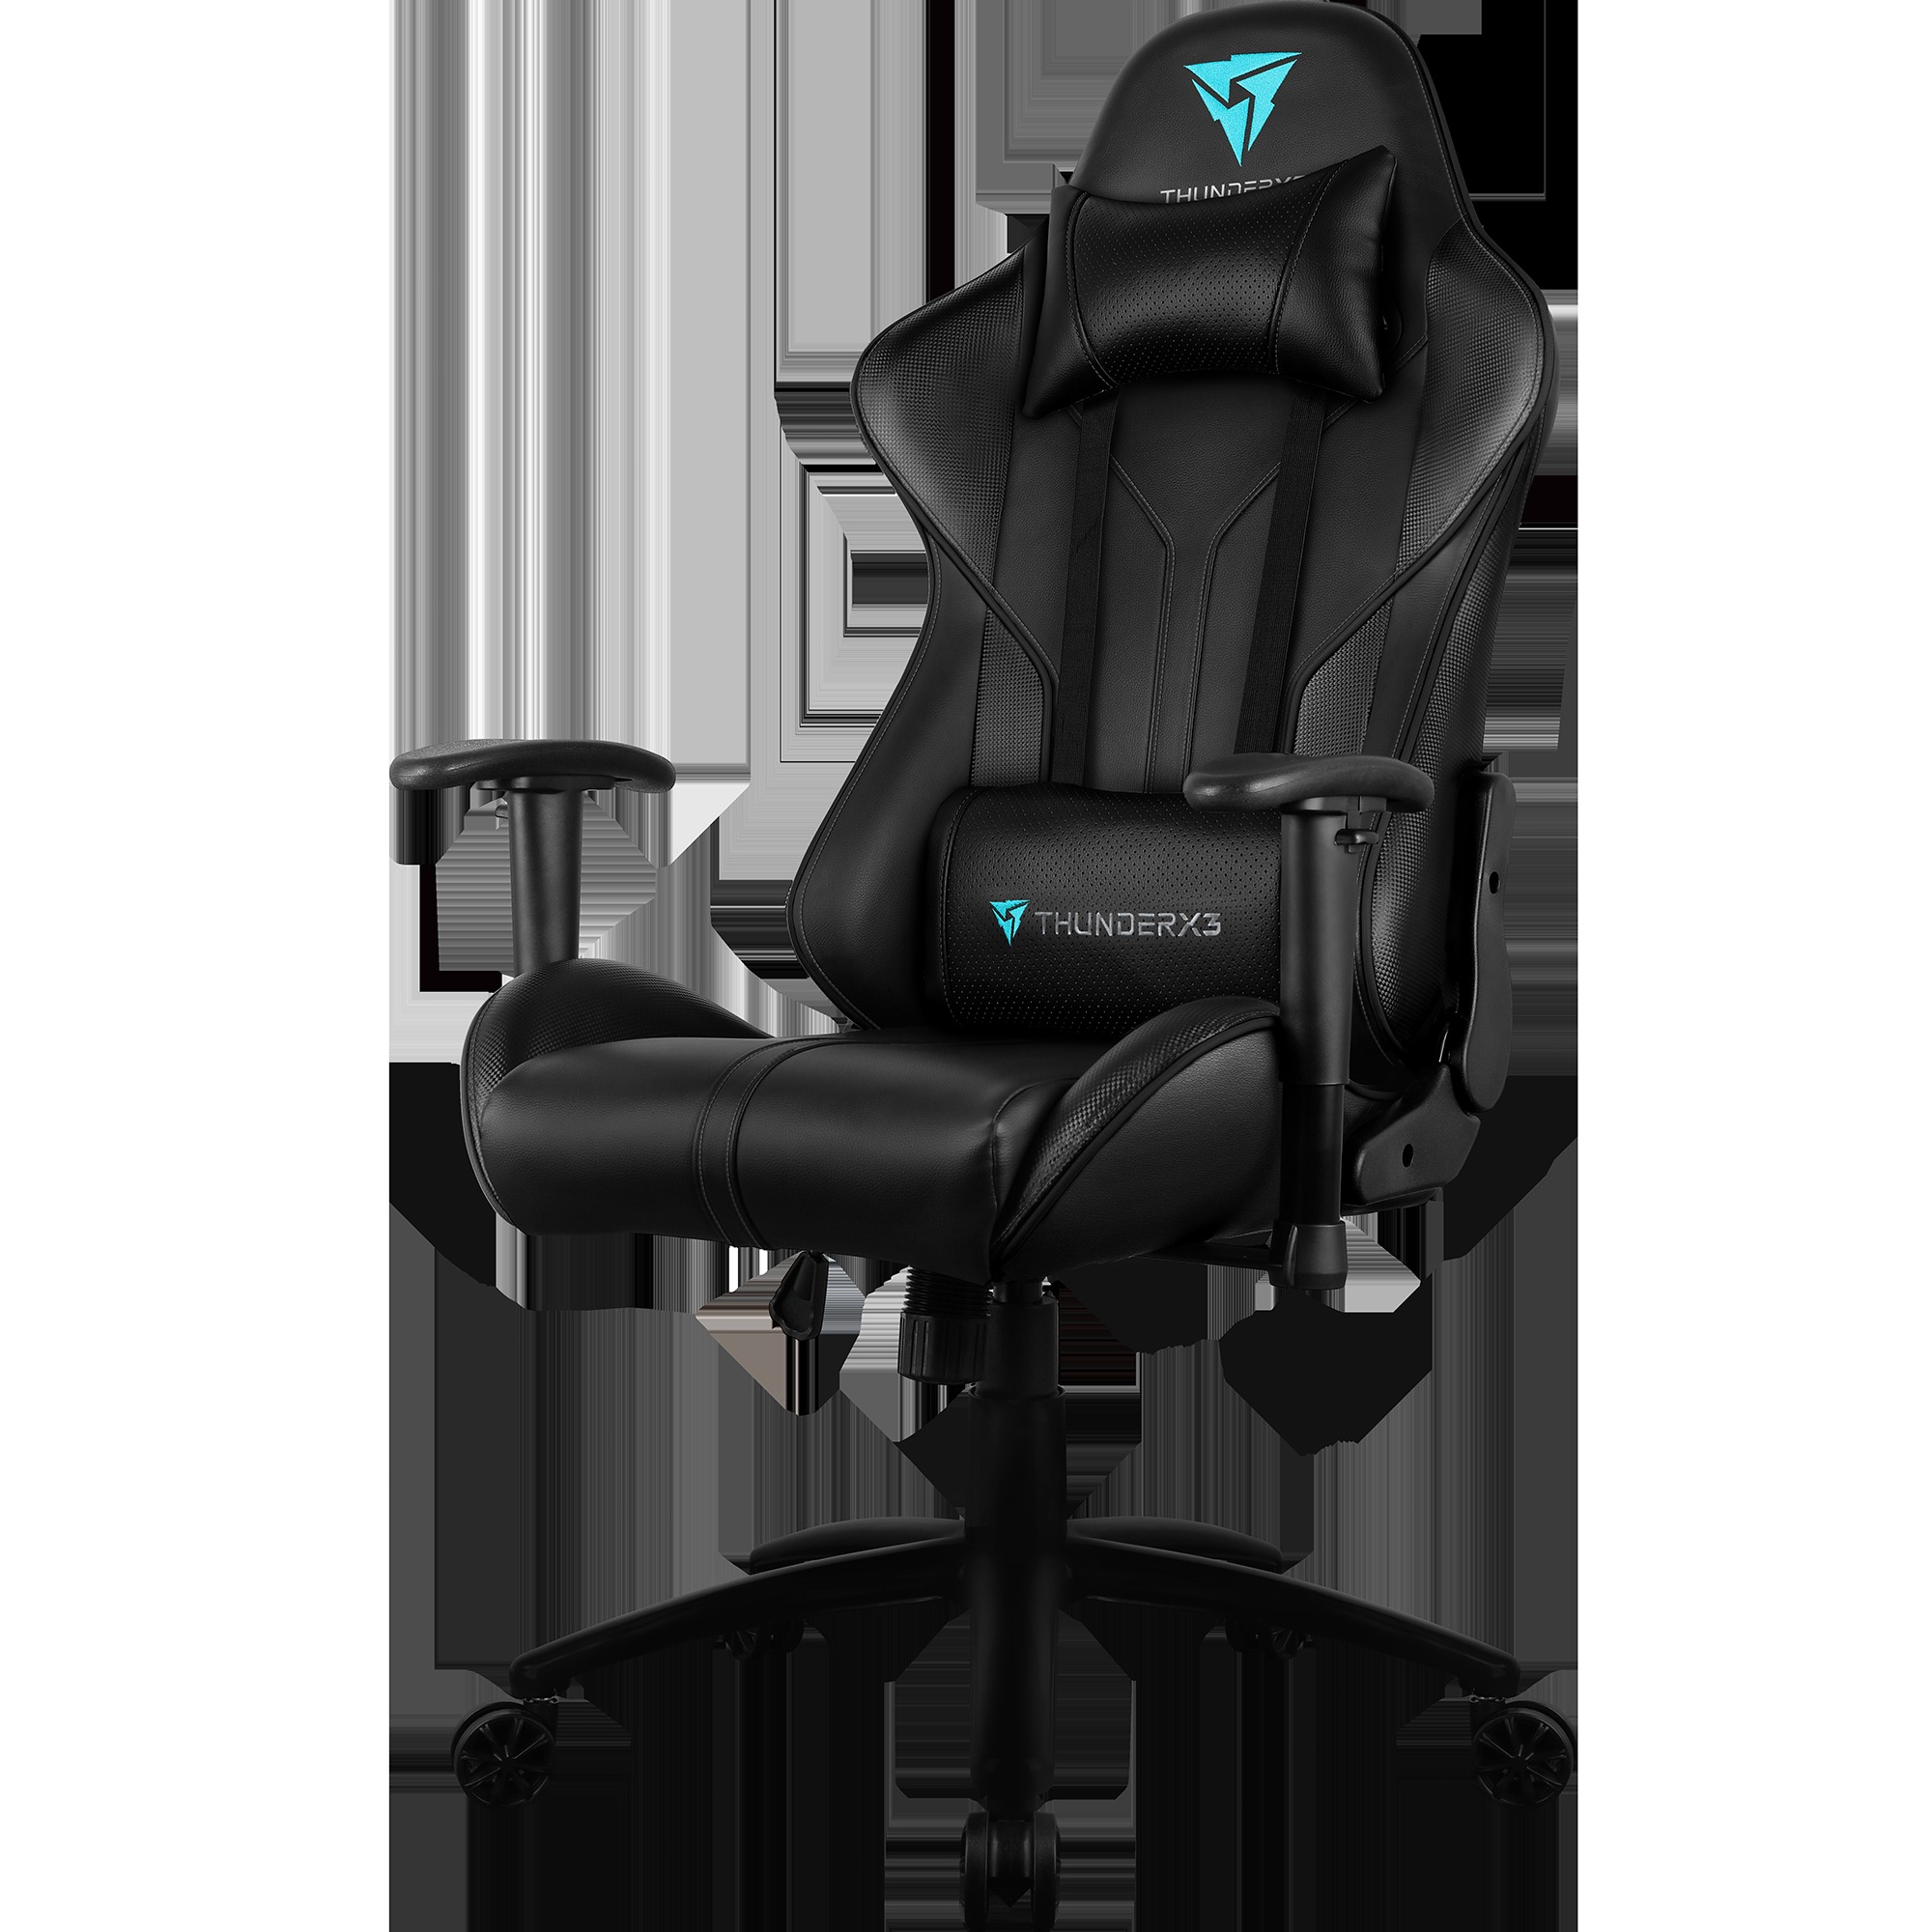 details about new thunderx3 rc3 hex rgb lighting gaming chair   thunderx3office chairs